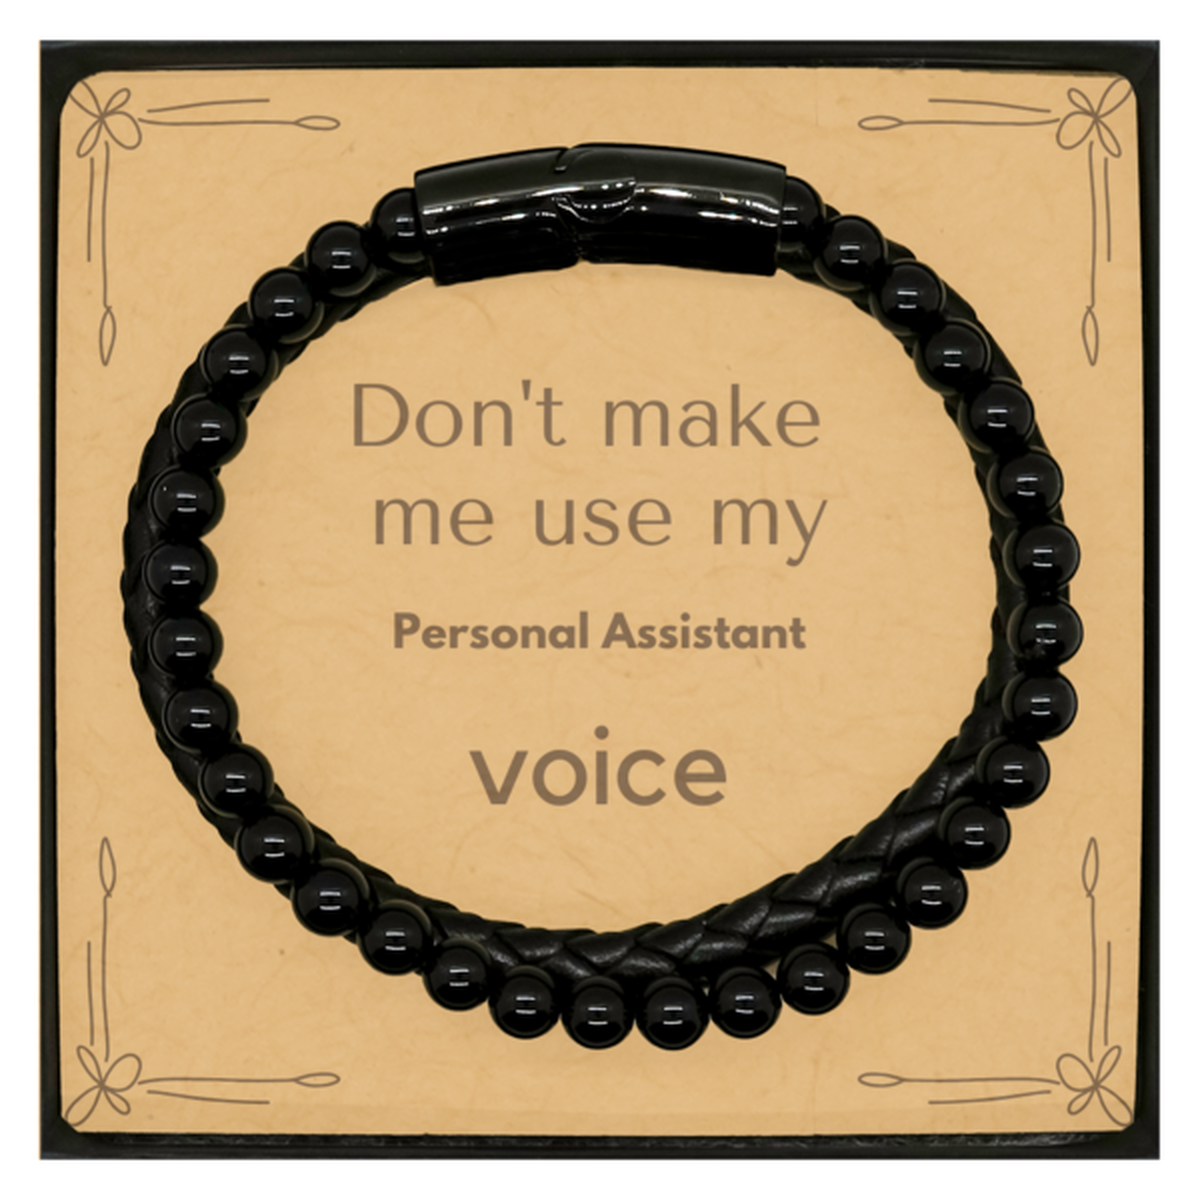 Don't make me use my Personal Assistant voice, Sarcasm Personal Assistant Card Gifts, Christmas Personal Assistant Stone Leather Bracelets Birthday Unique Gifts For Personal Assistant Coworkers, Men, Women, Colleague, Friends